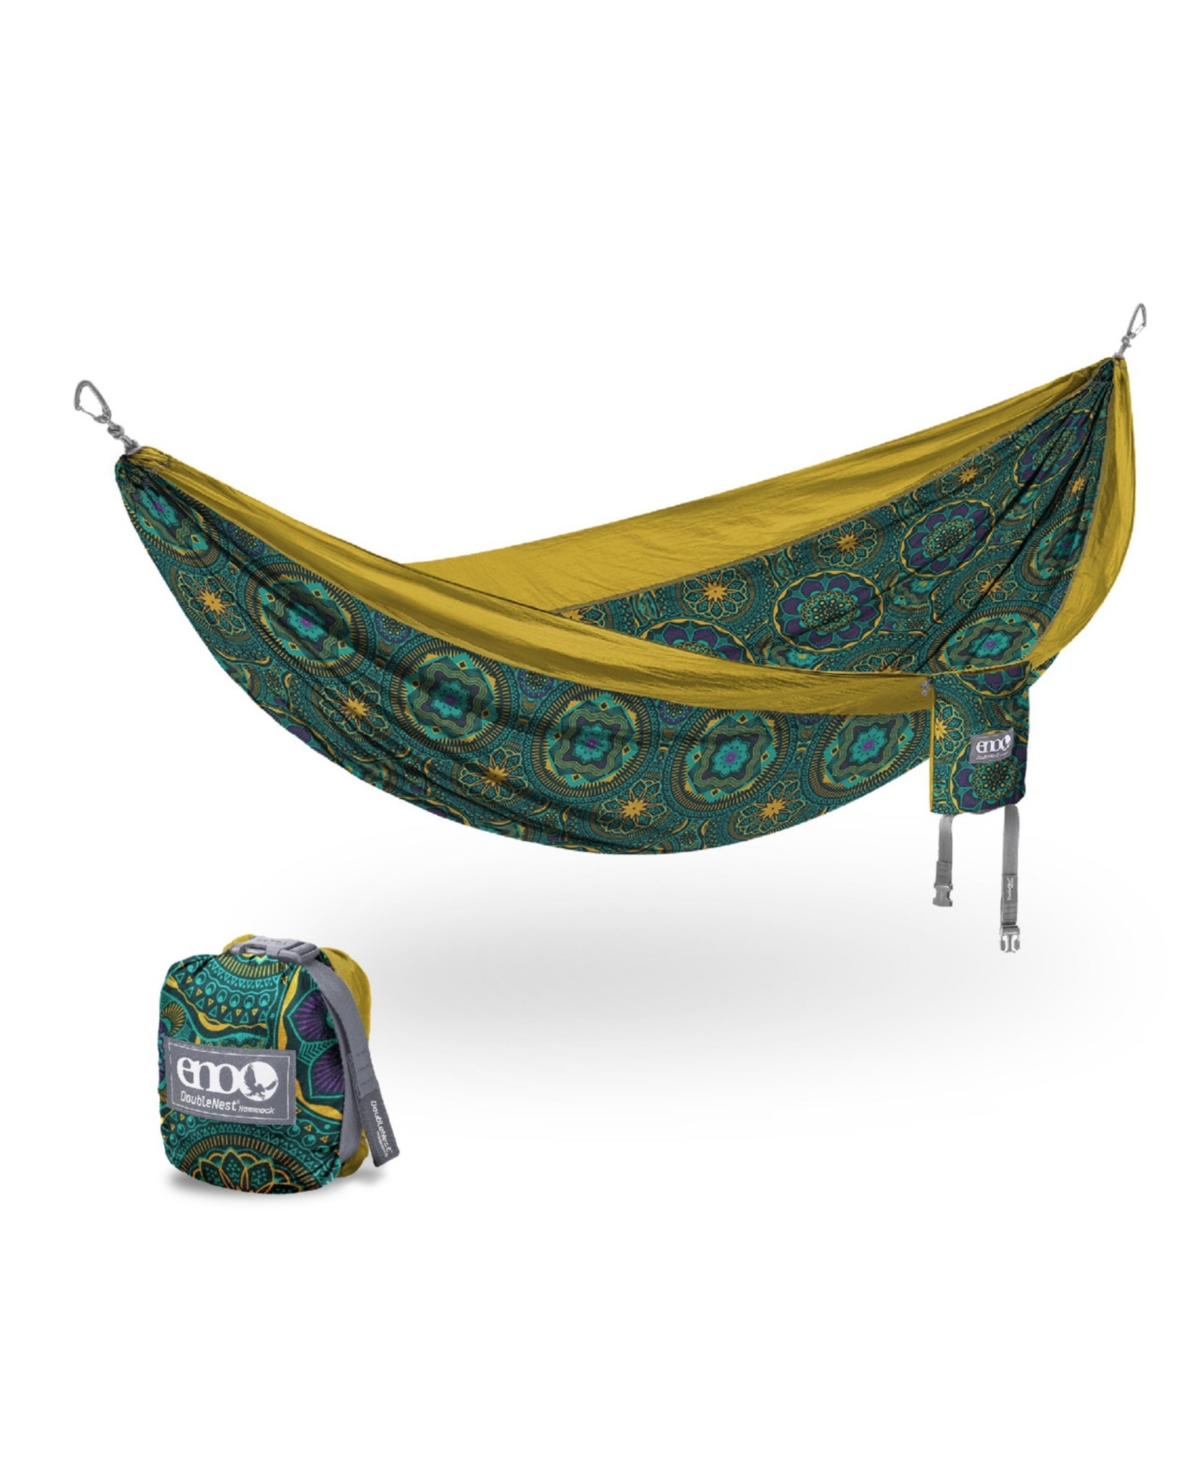 DoubleNest Hammock - Lightweight, Portable, 1 to 2 Person Hammock - For Camping, Hiking, Backpacking, Travel, a Festival, or the Beach - Mantra/Go